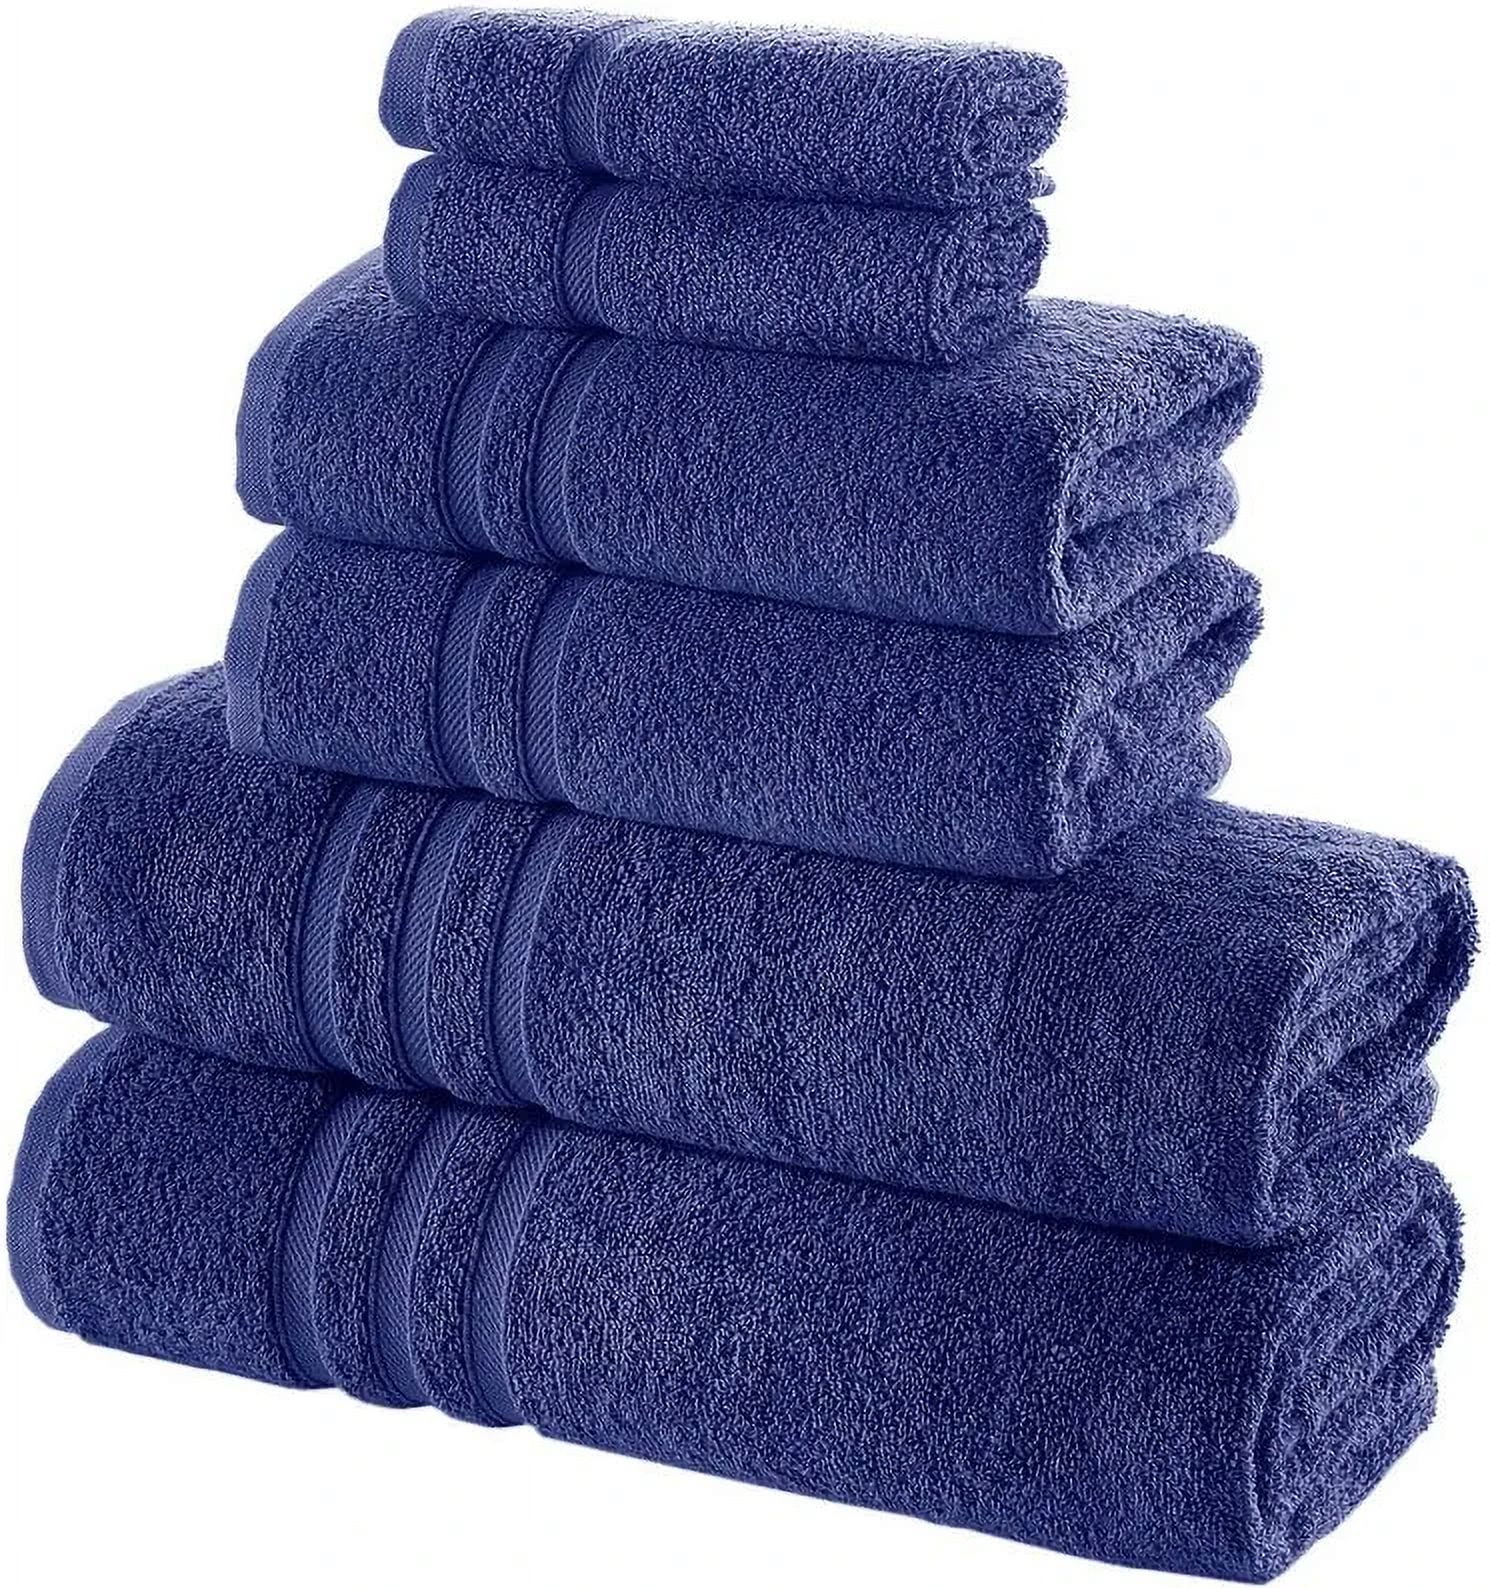 Set of 2 Navy and Light Blue Linen Kitchen Towels Twill - LinenMe